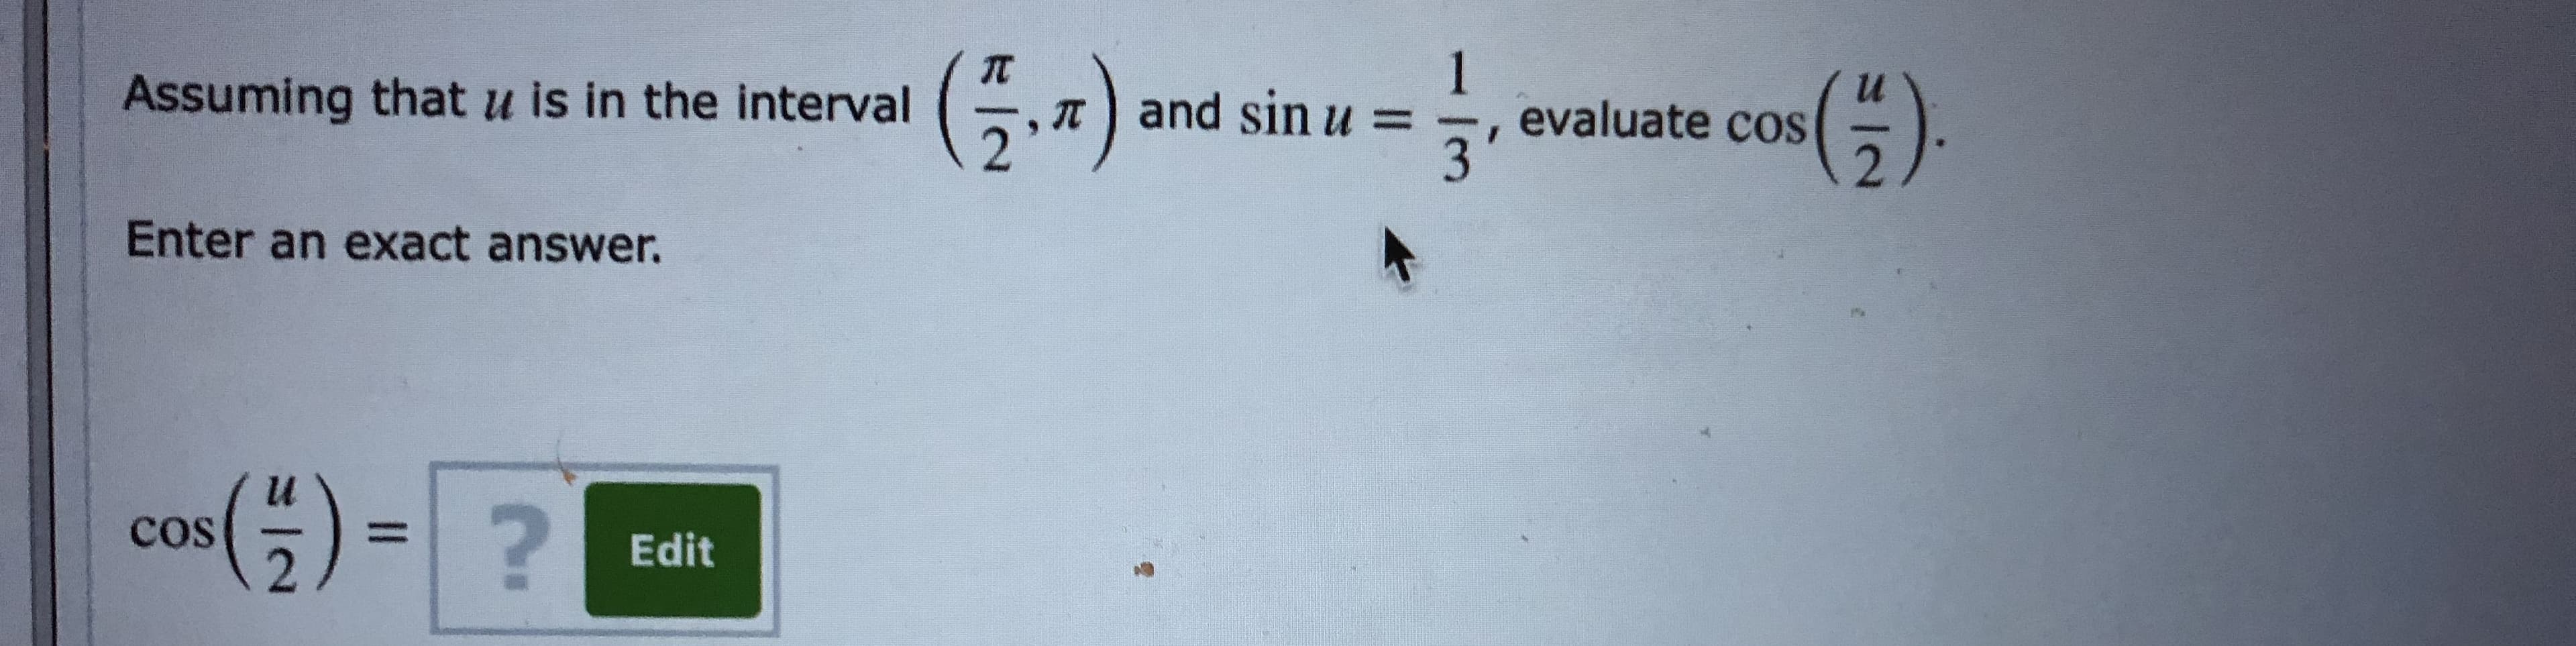 (5.7).
1
evaluate cos
3'
(5)
Assuming that u is in the interval
and sin u =
Enter an exact answer.
()
cos
%3D
2 Edit
